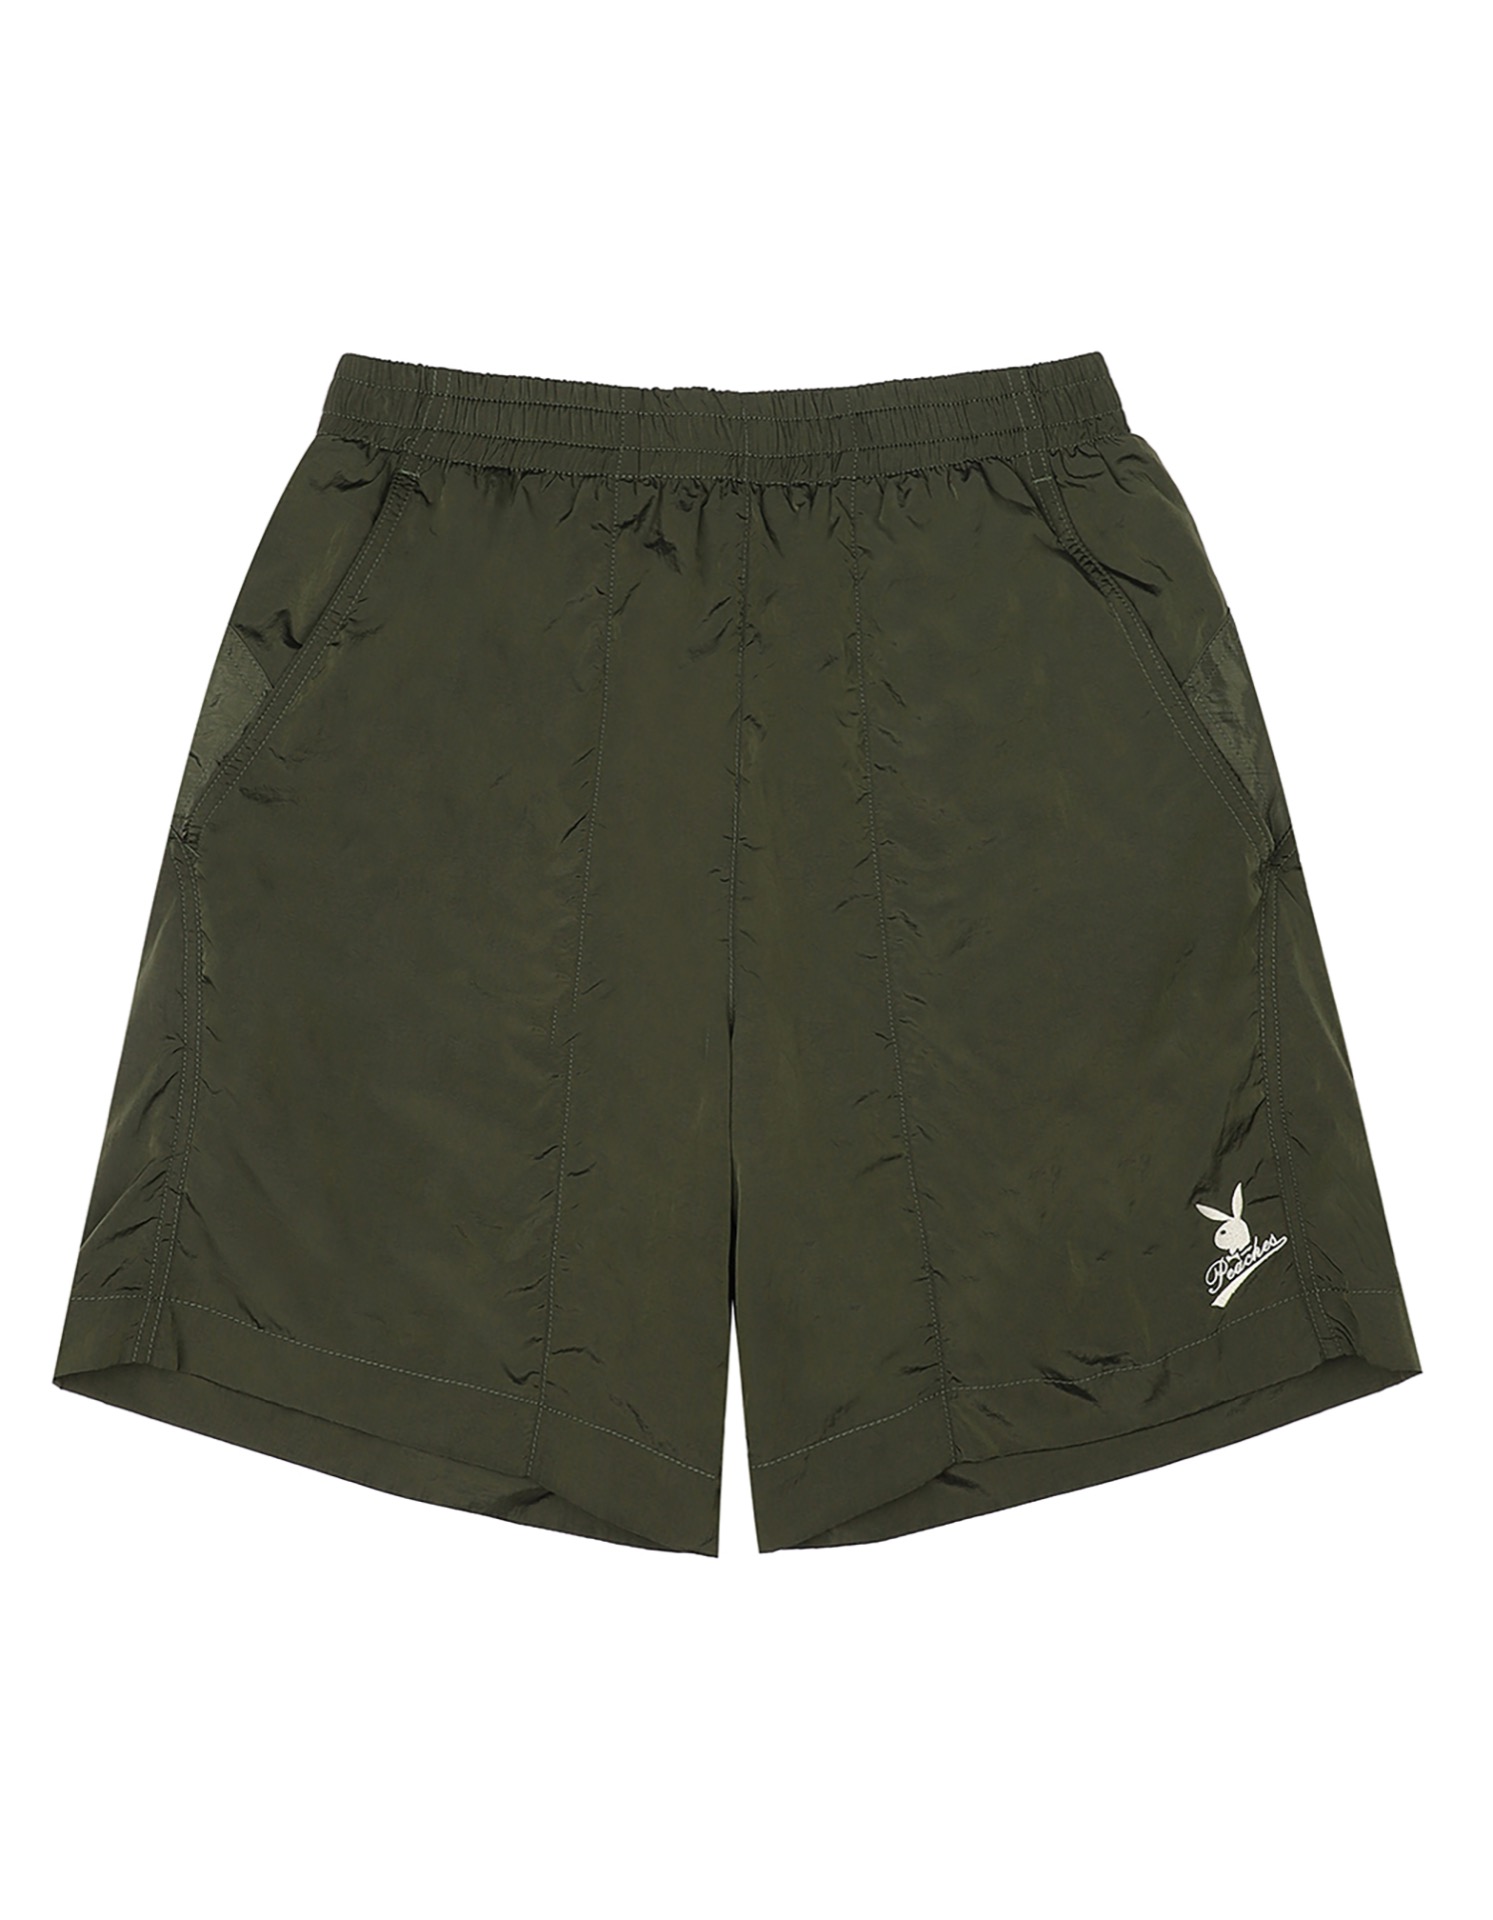 Player Shorts - Olive